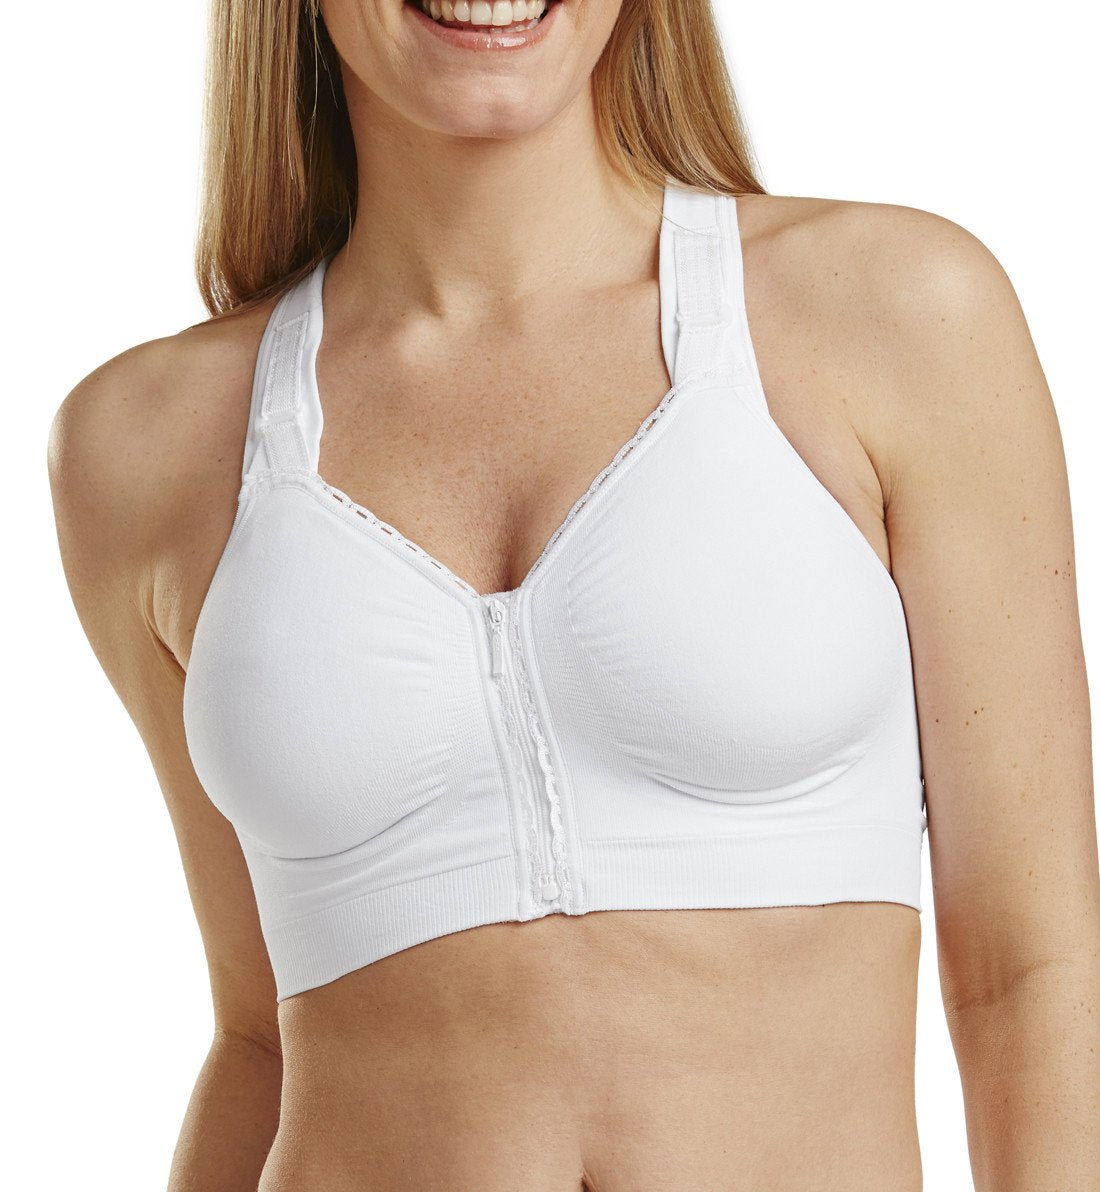 Carefix Ava Seamless Front Close Post-Op Surgical Bra (3444),LargeA-C,White - White,Large A - C Cups